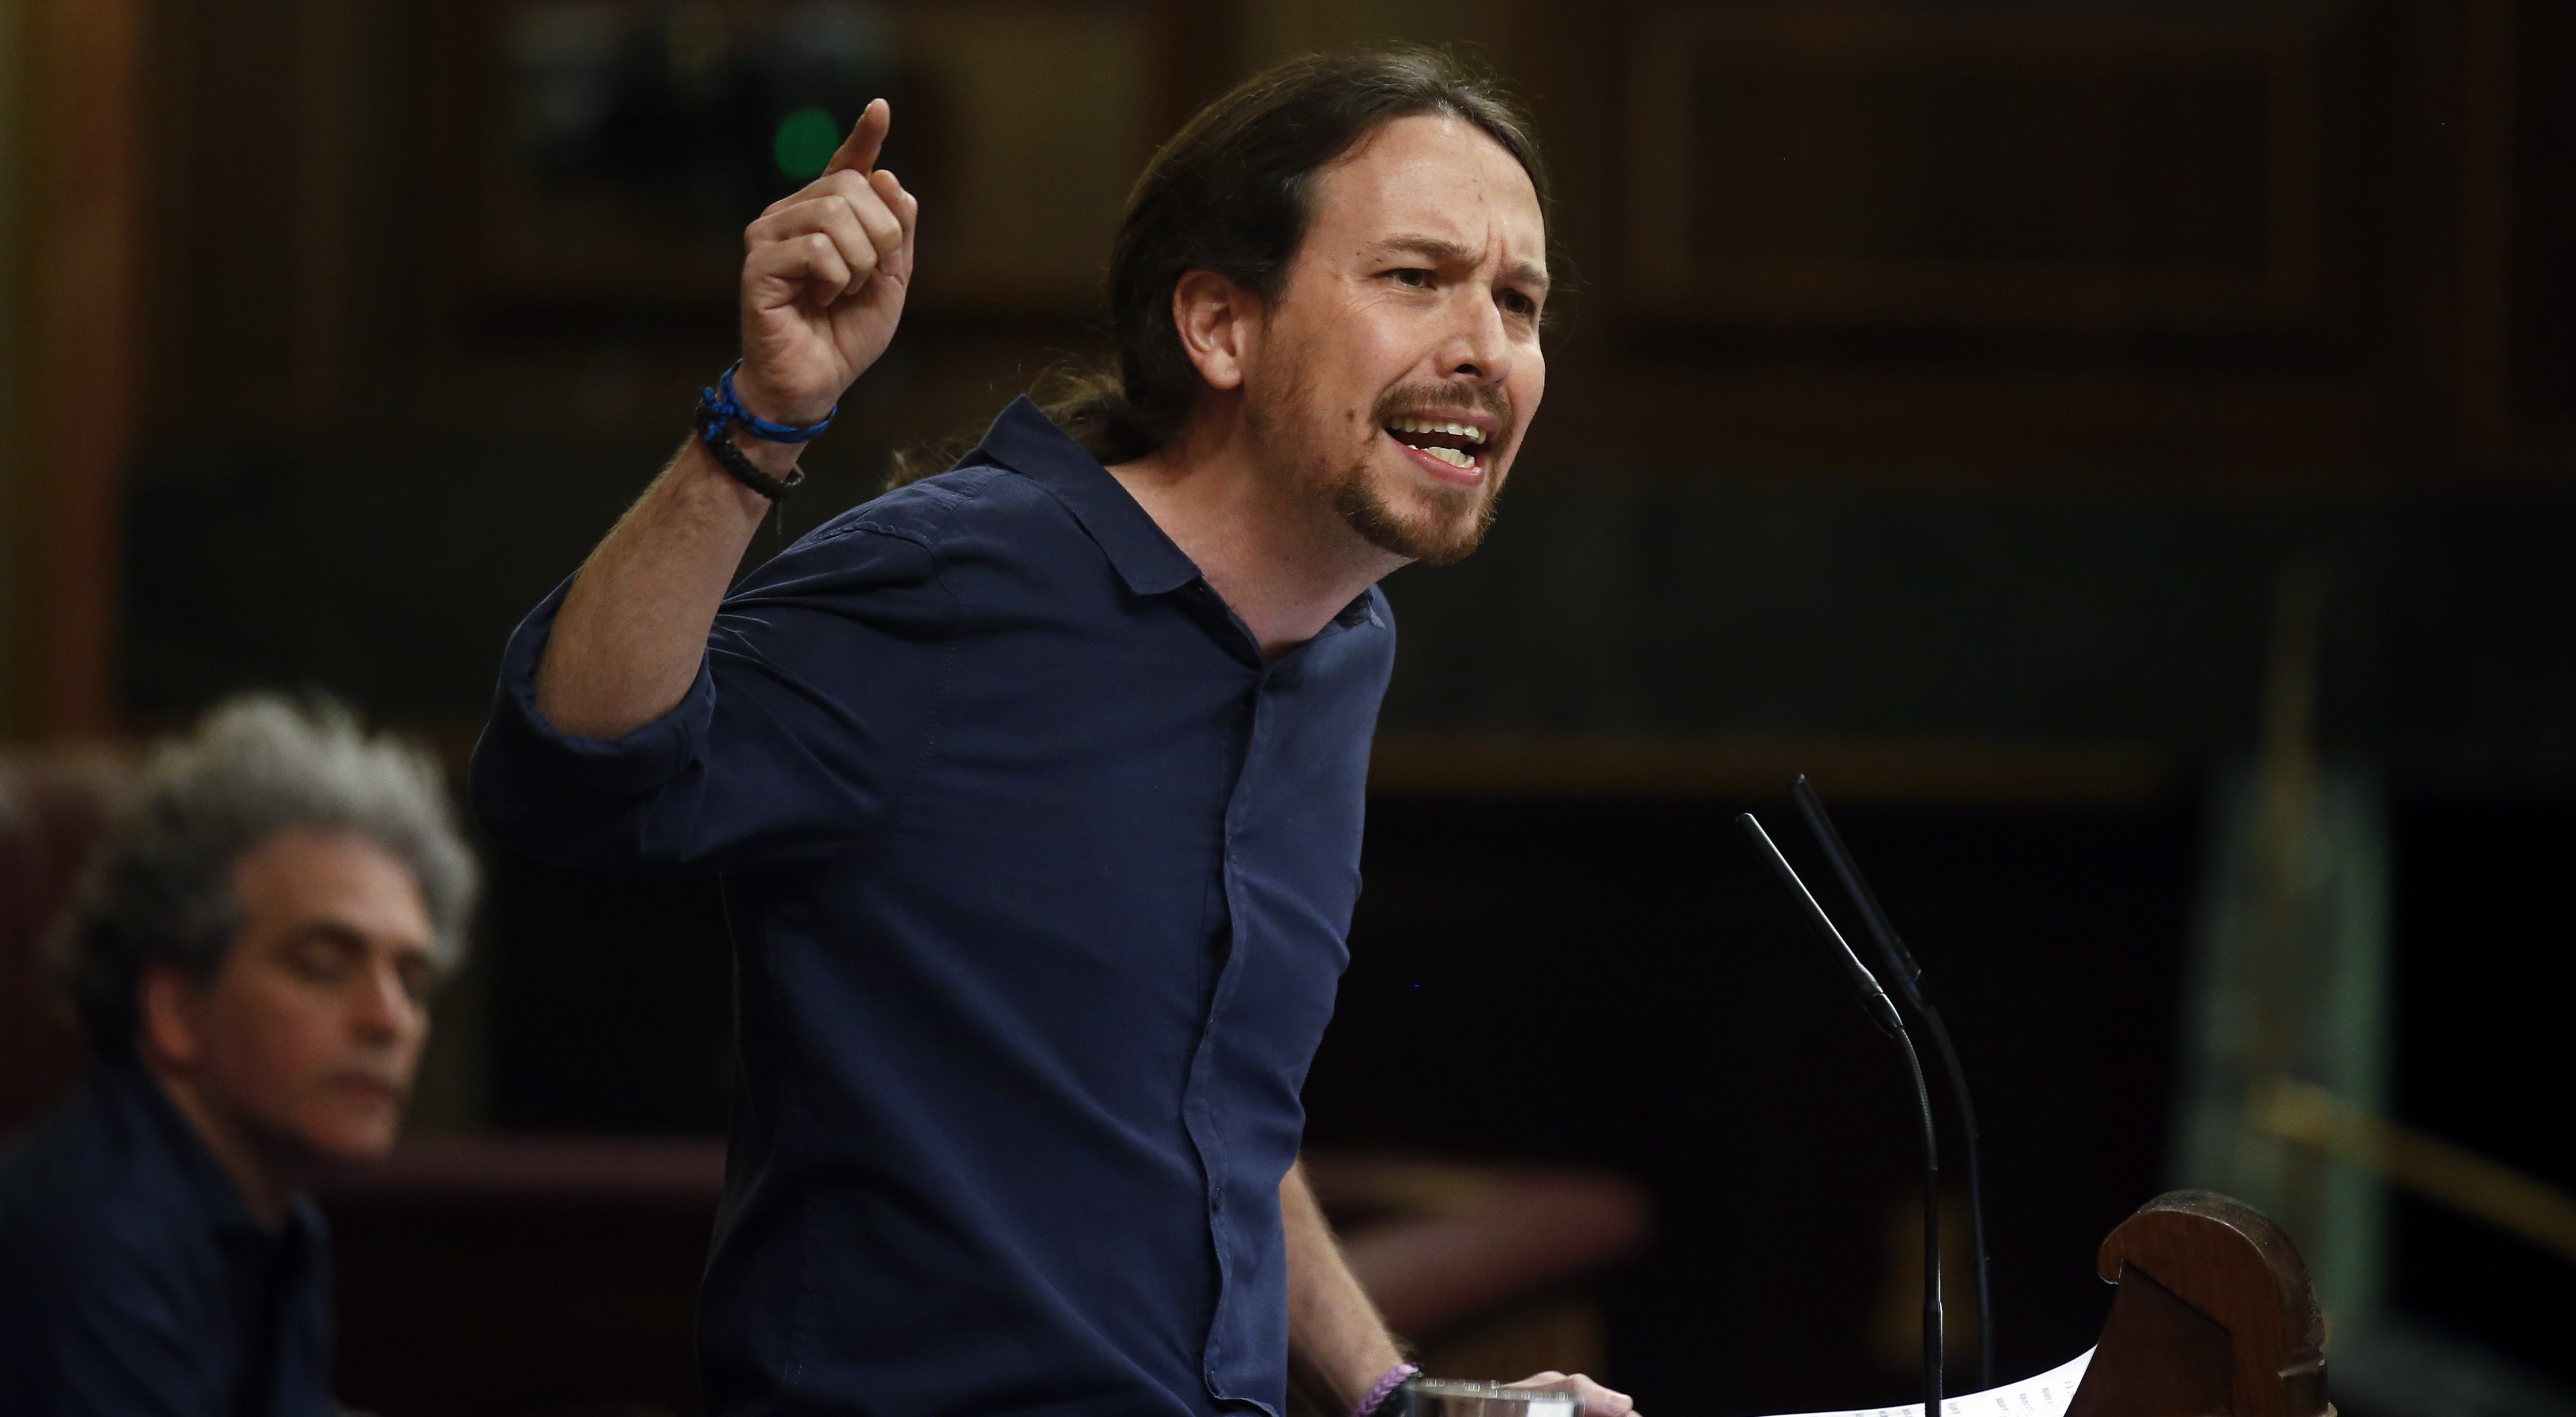 Podemos (We Can) party leader Pablo Iglesias speaks during a parliamentary session in Madrid, Spain, April 6, 2016.  REUTERS/Andrea Comas - RTSDSEN